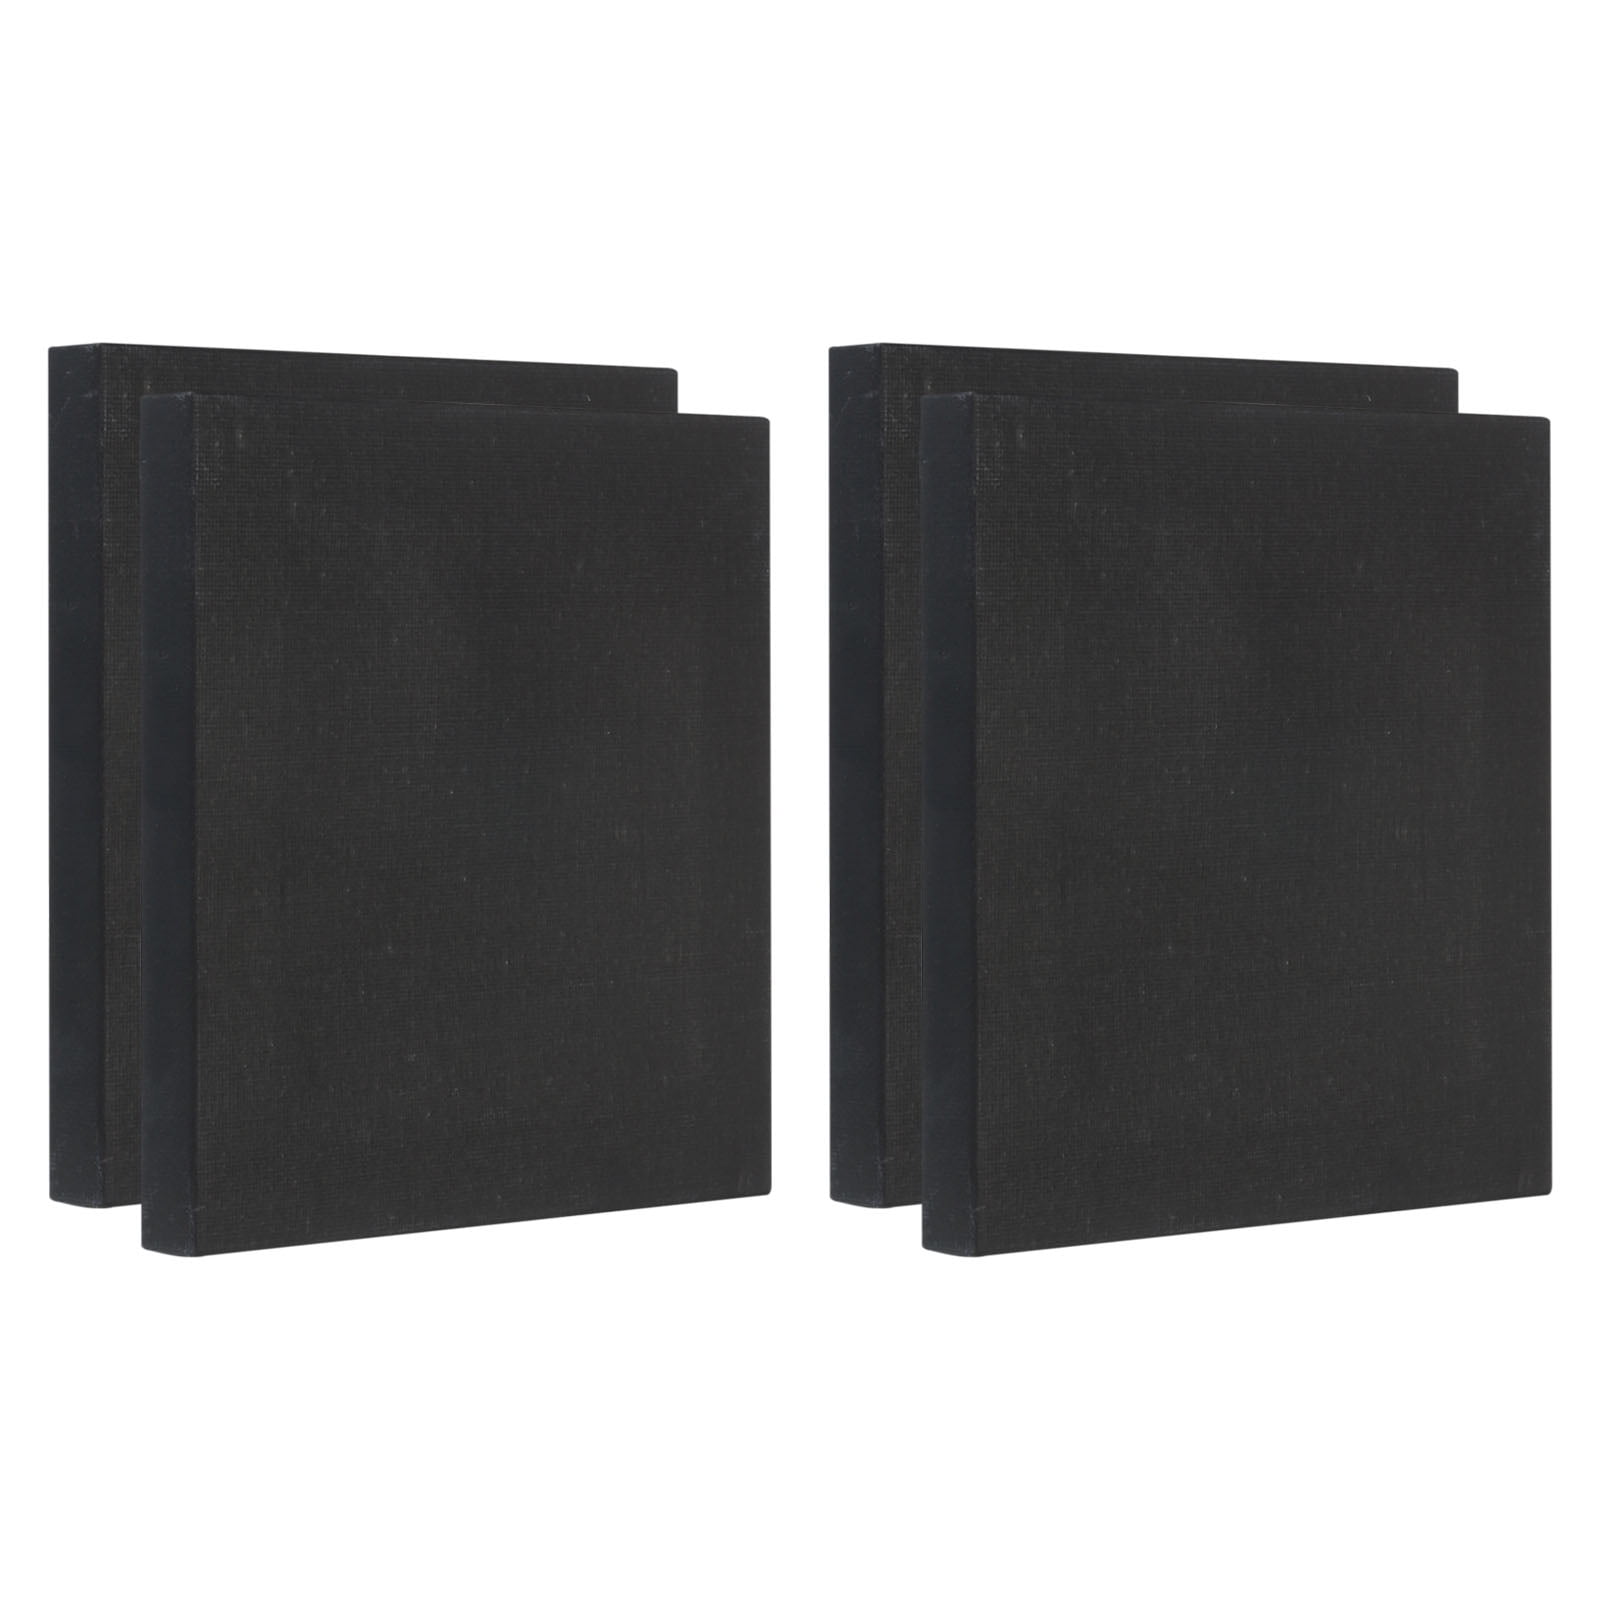 ZXT-parts 8x8 Picture Frames Black Packs 4, 6x6 Picture Frame with